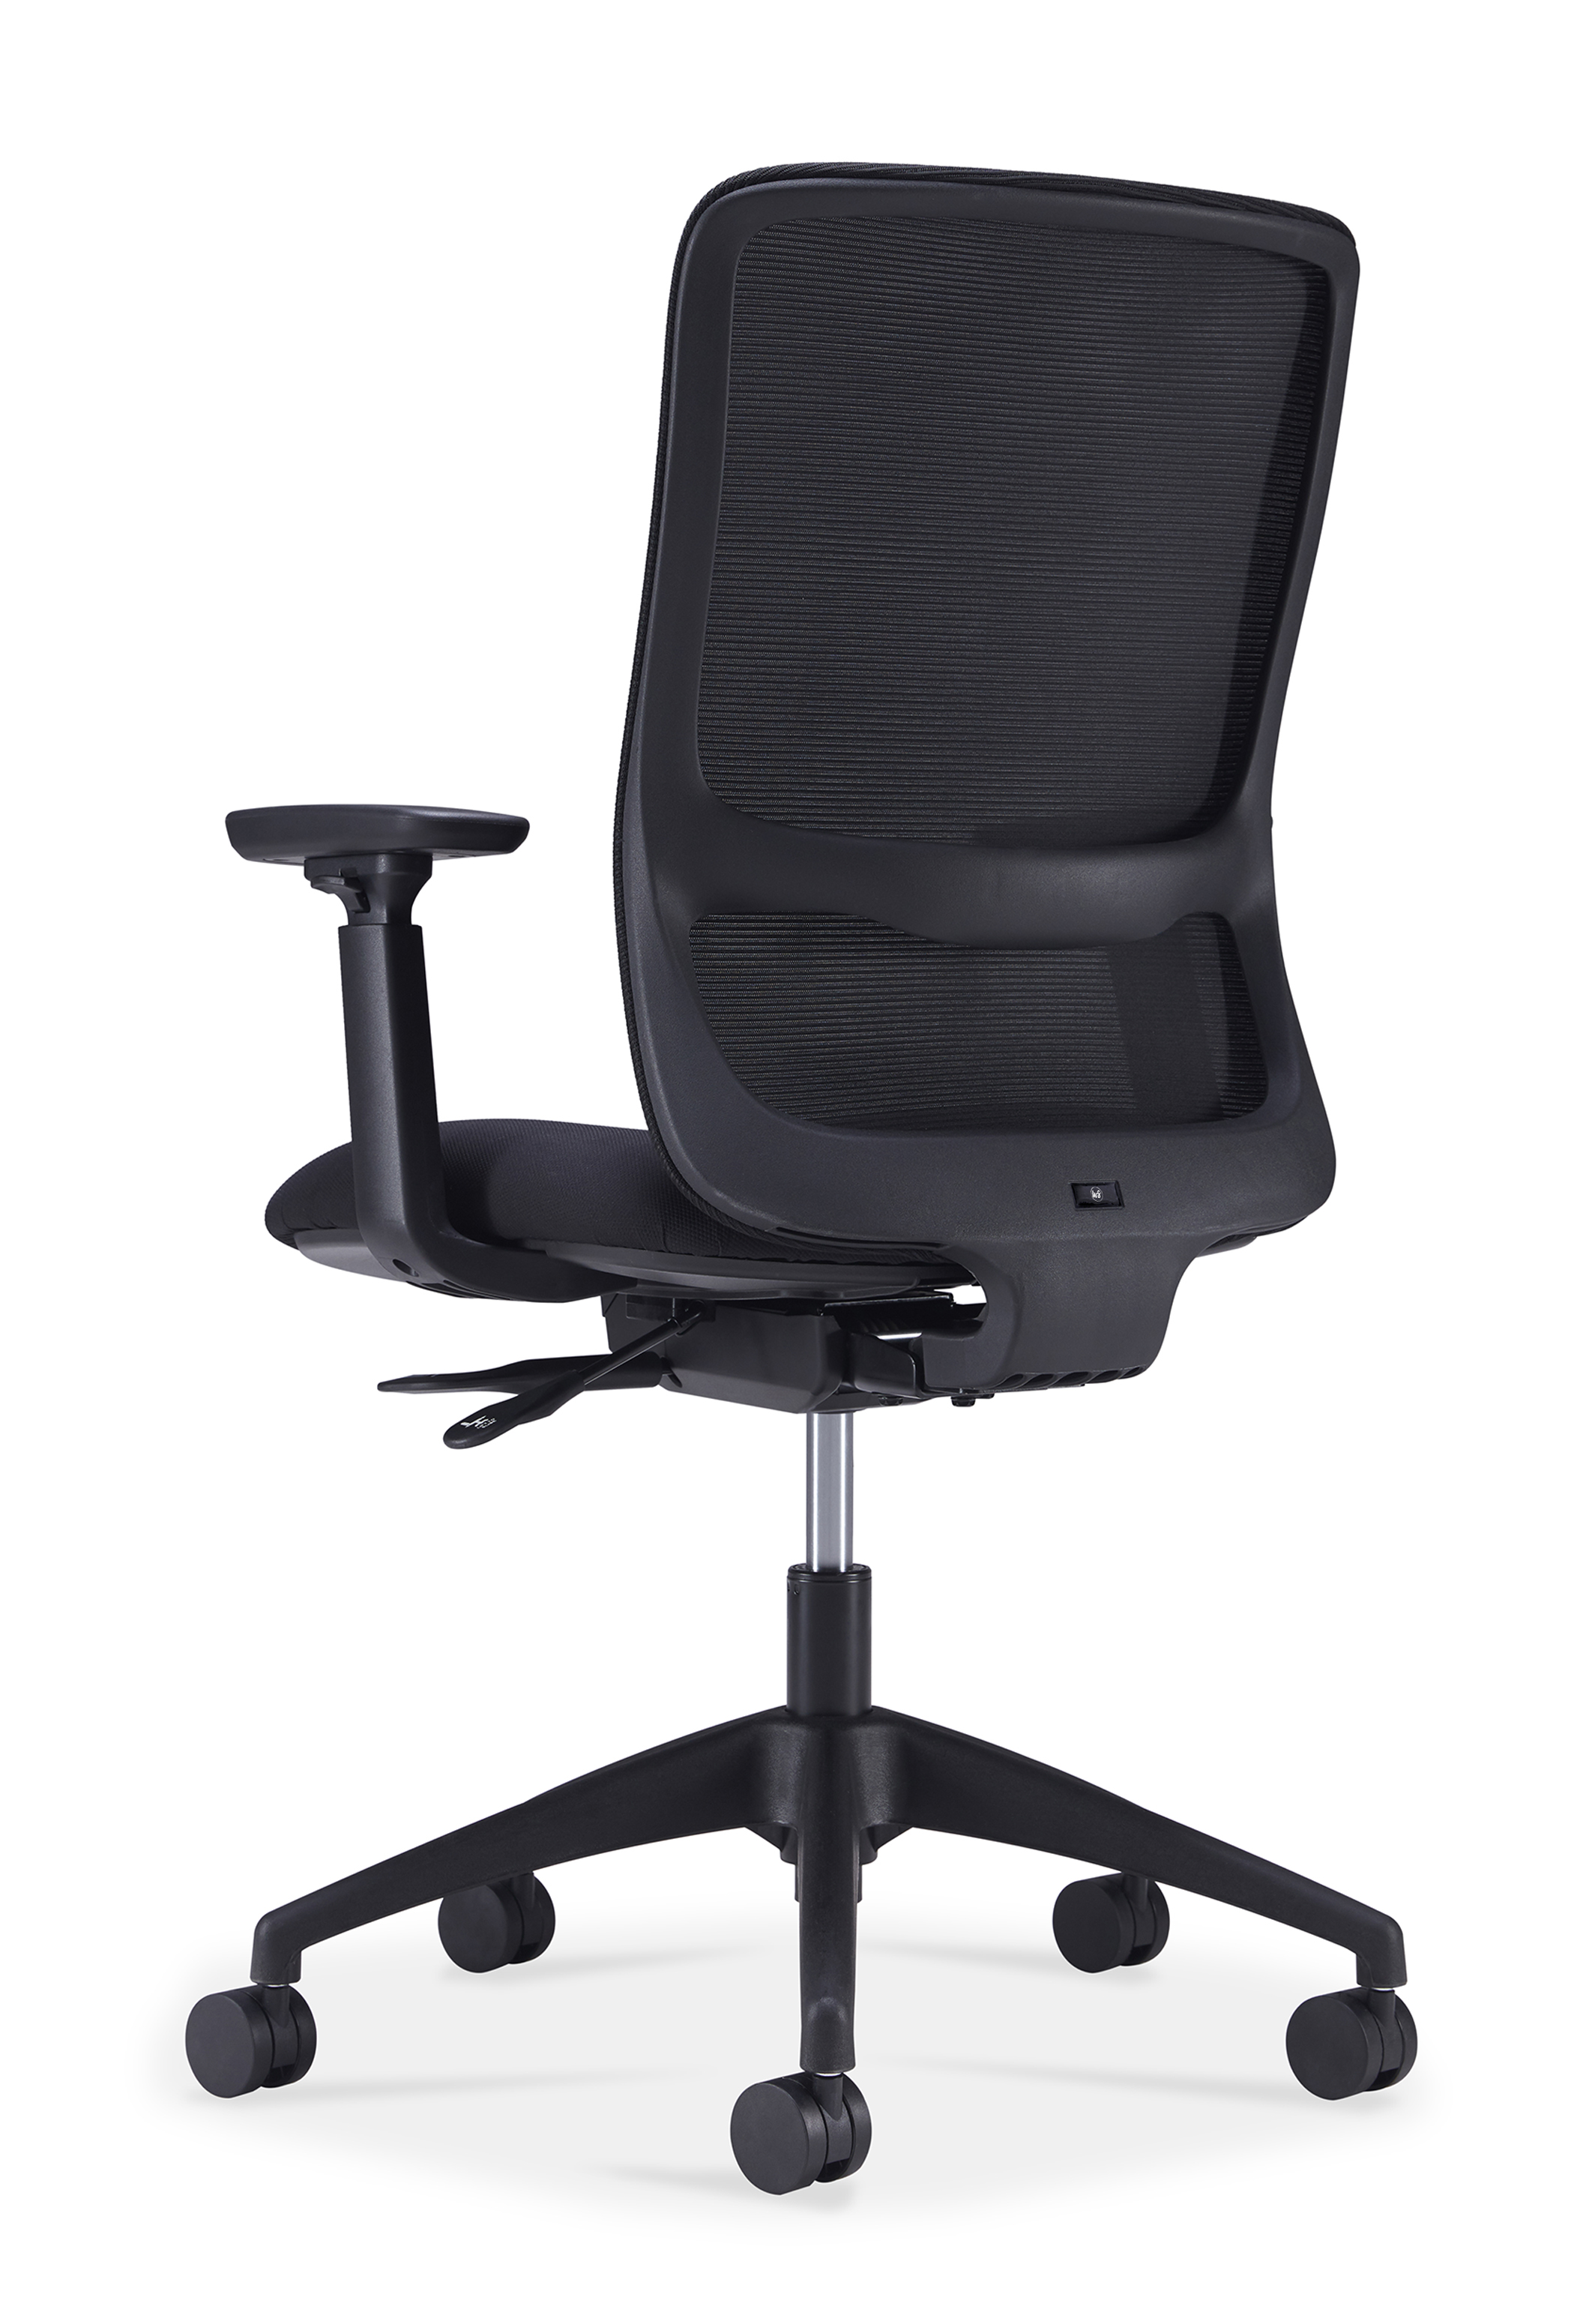 WS - L21 task chair (Back angle)